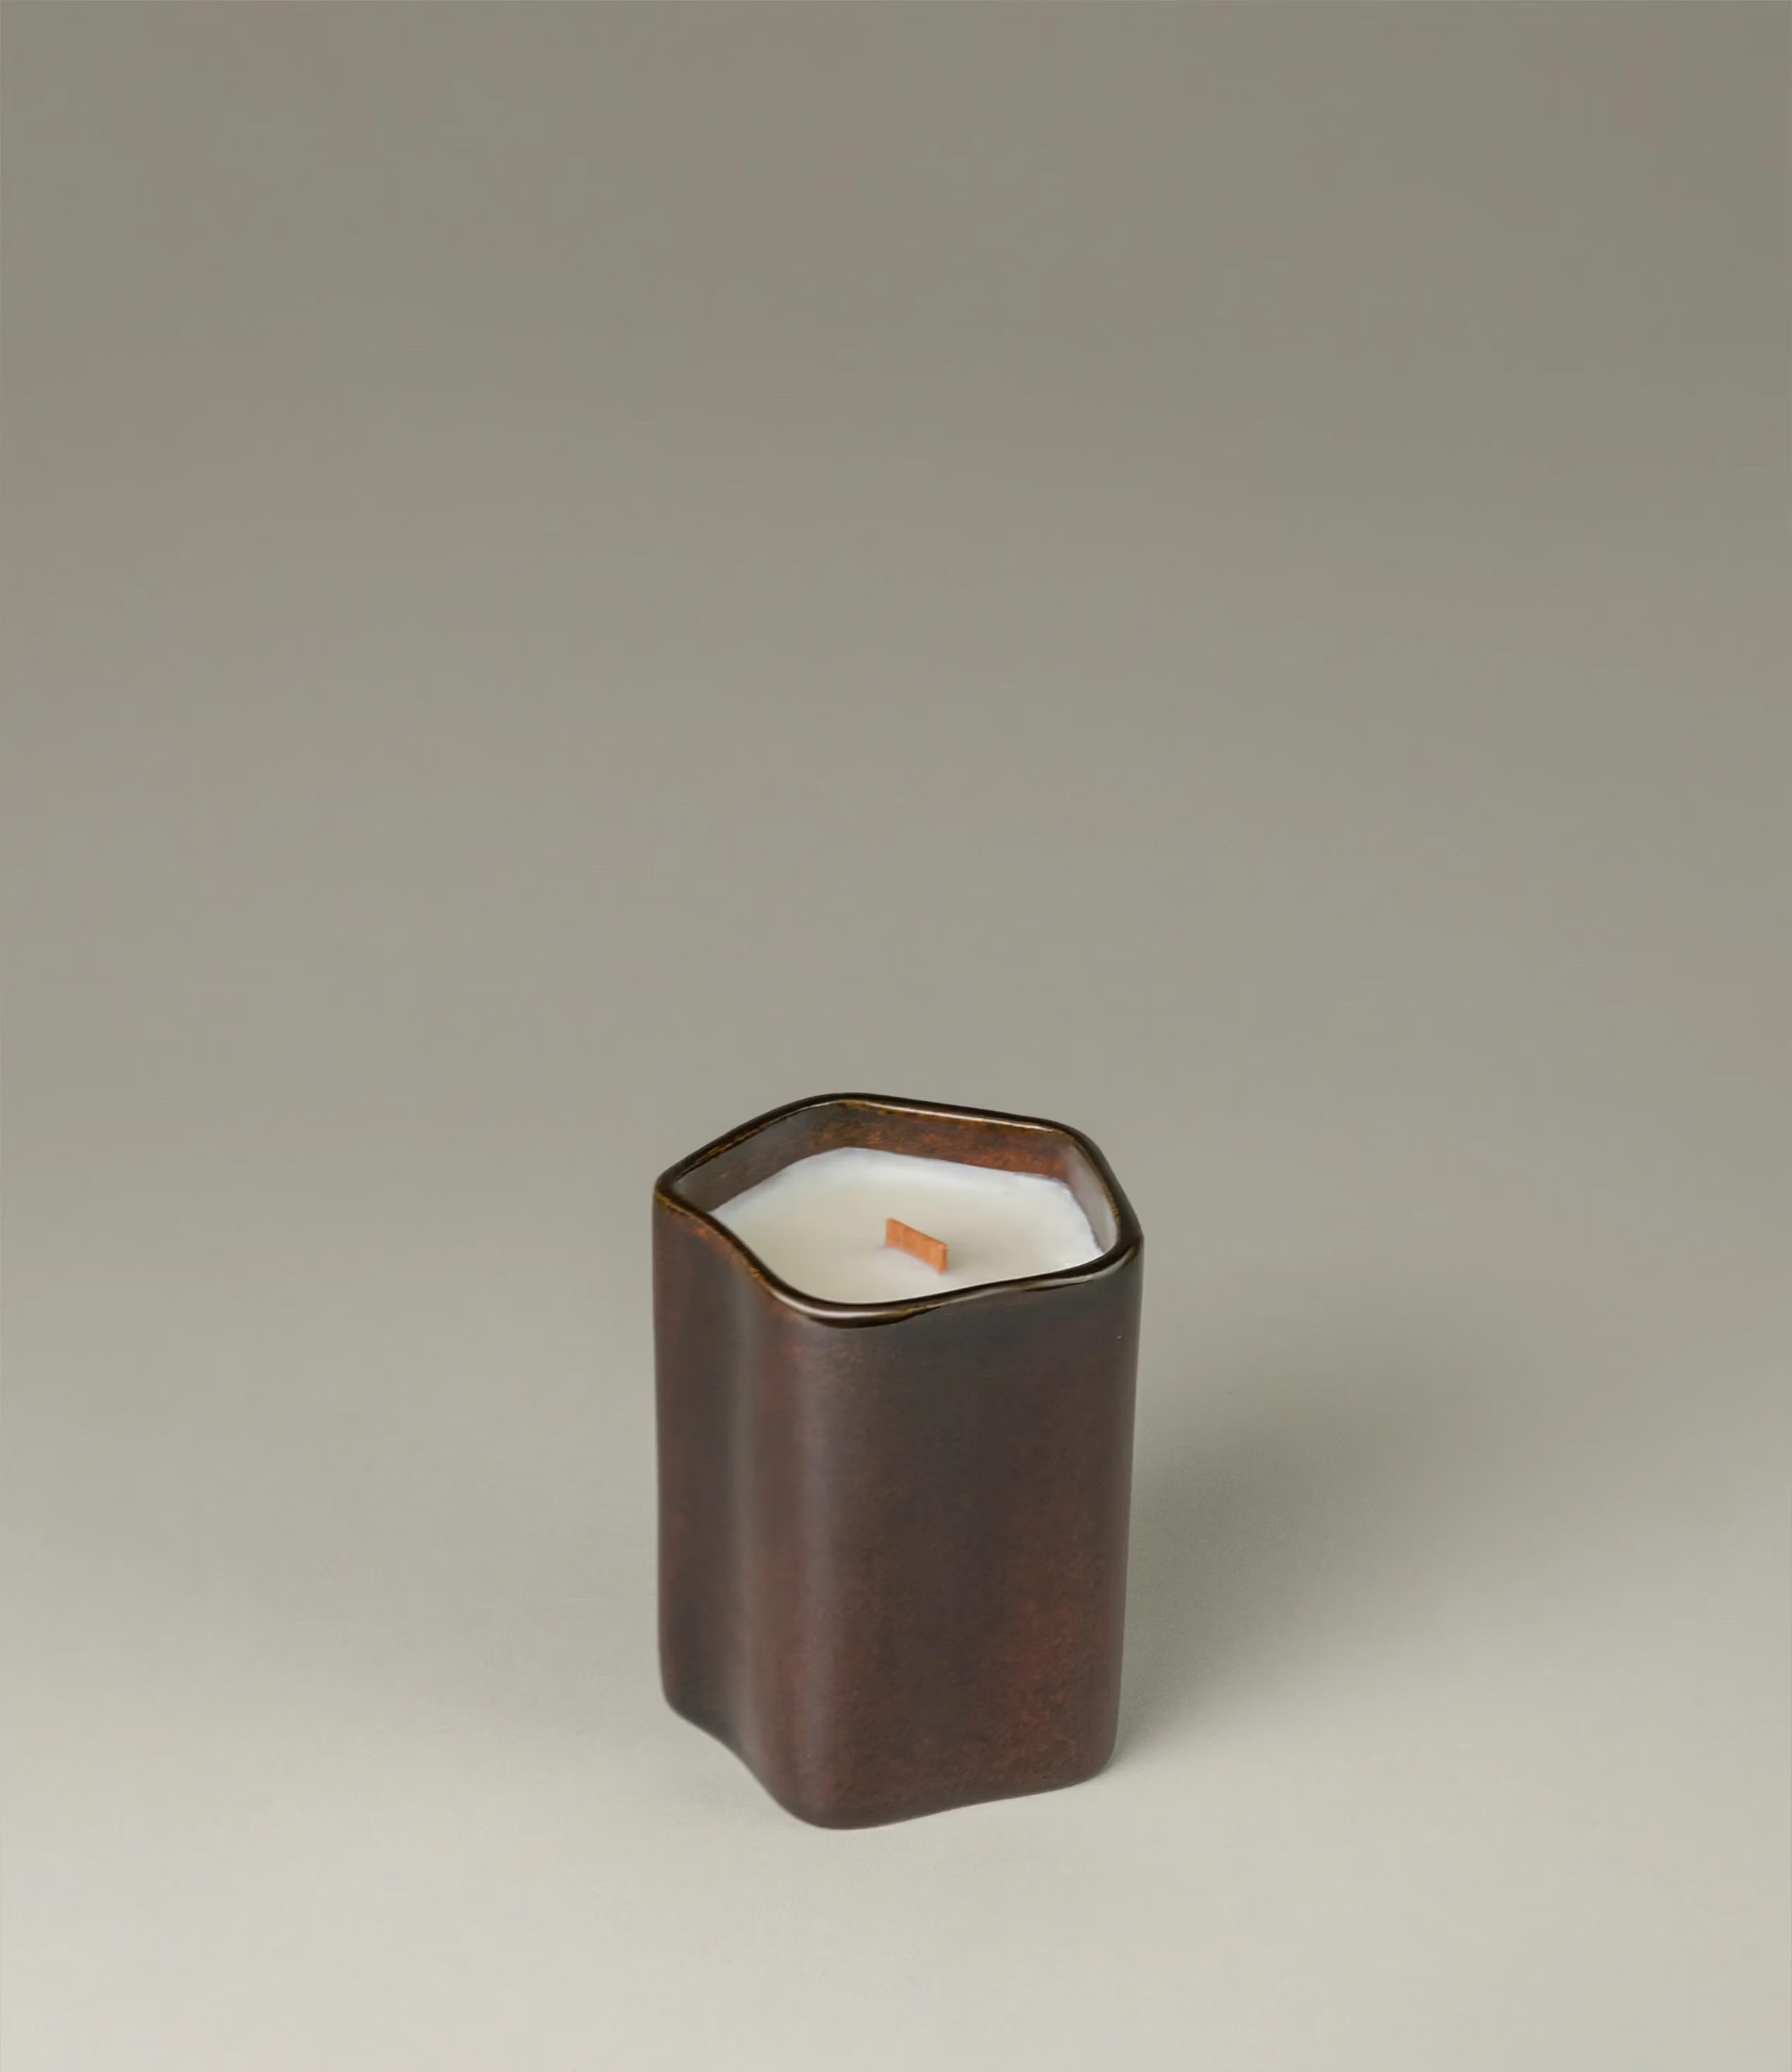 A scented Wax Candle designed by Ocactuu. The candle has a peach scent and it comes in a glossy dark brown ceramic. The material has a subtle spotted texture. The candle wick is made of wood for a more natural feeling.  